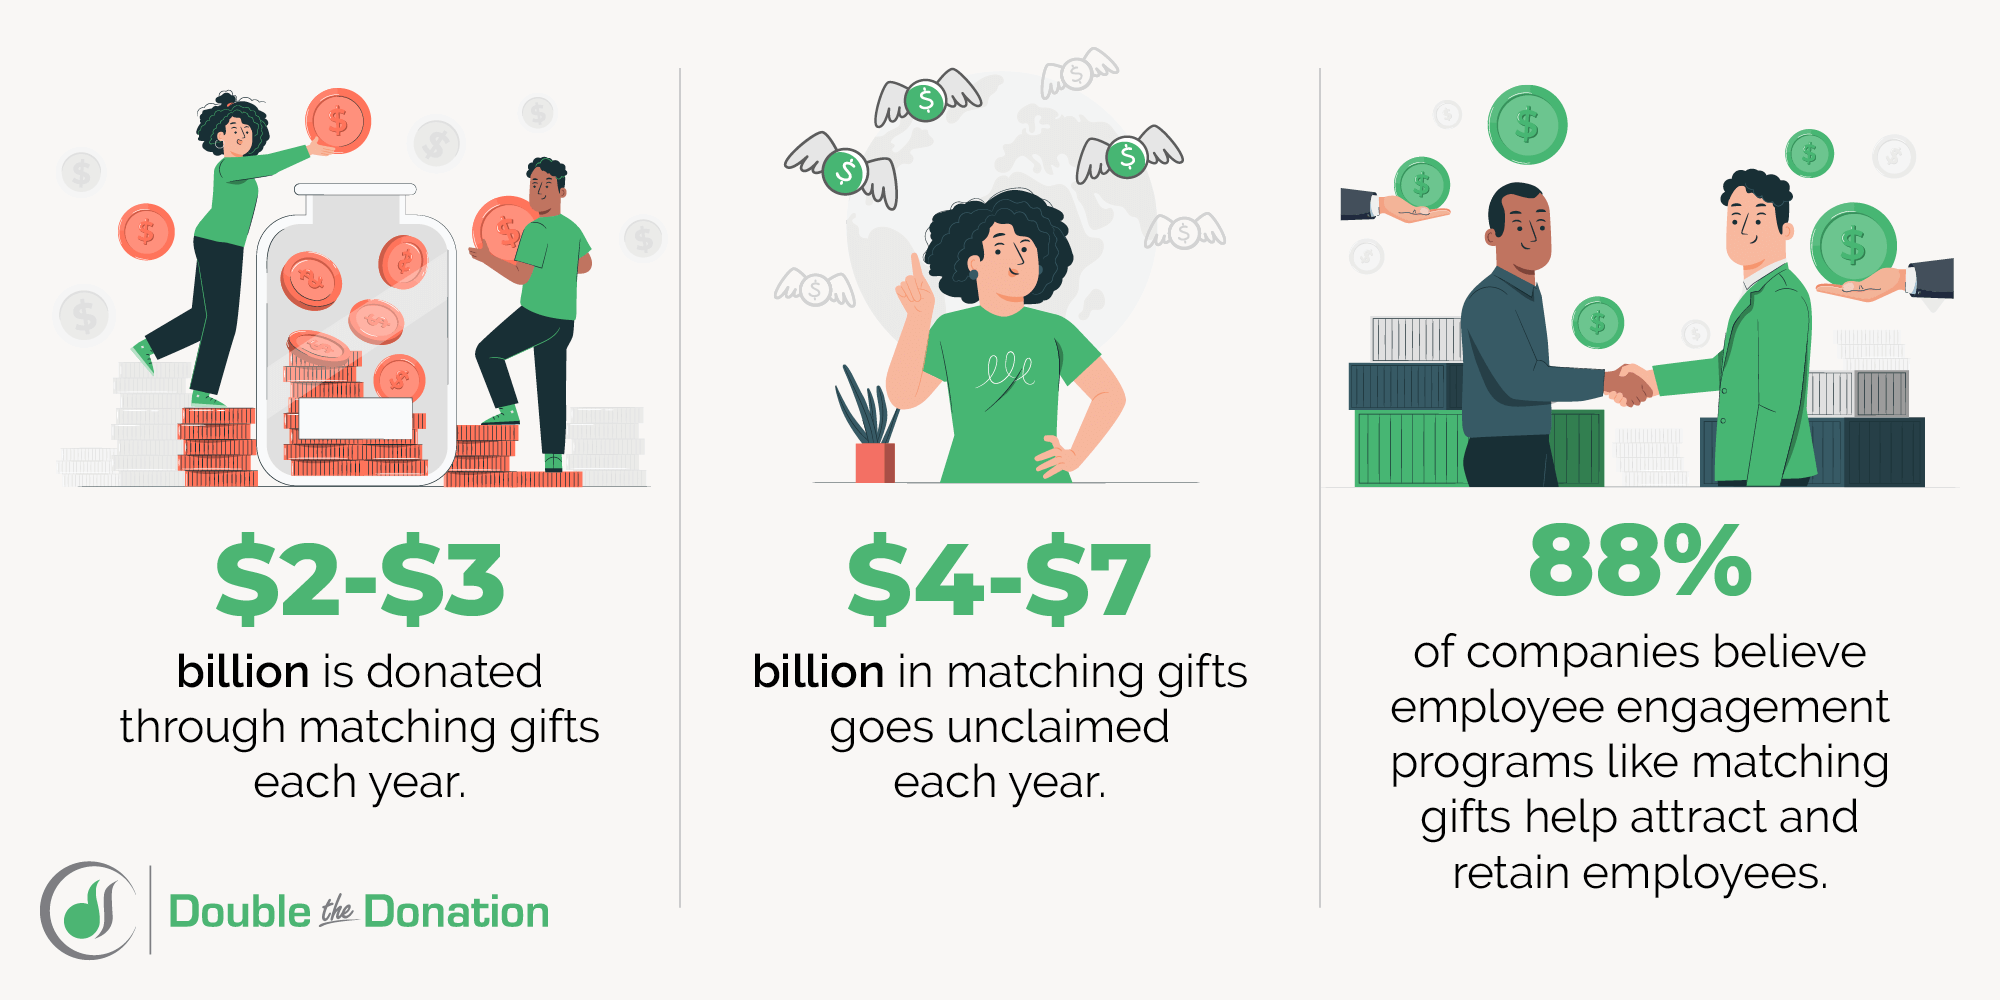 These statistics communicate the importance of gift matching.